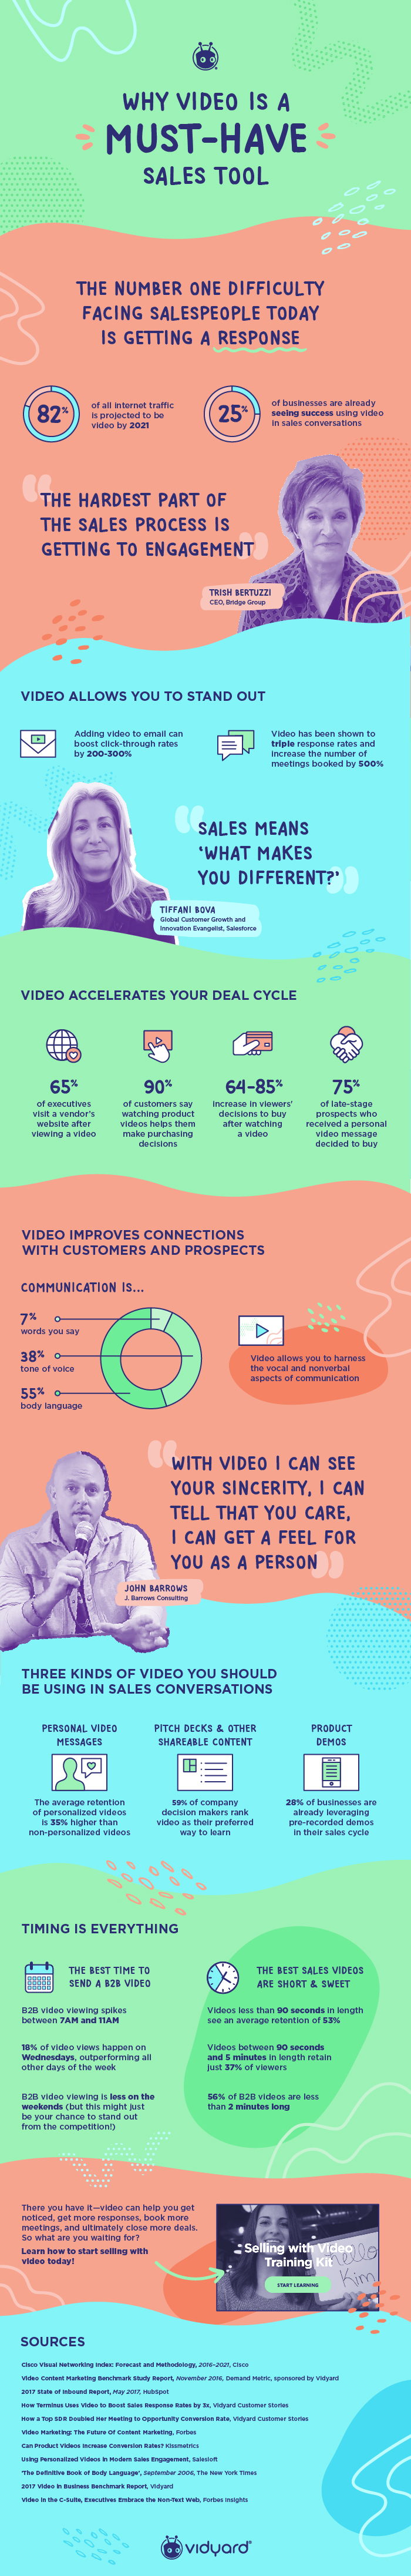 Why Video is a Must-Have Sales Tool [Infographic]